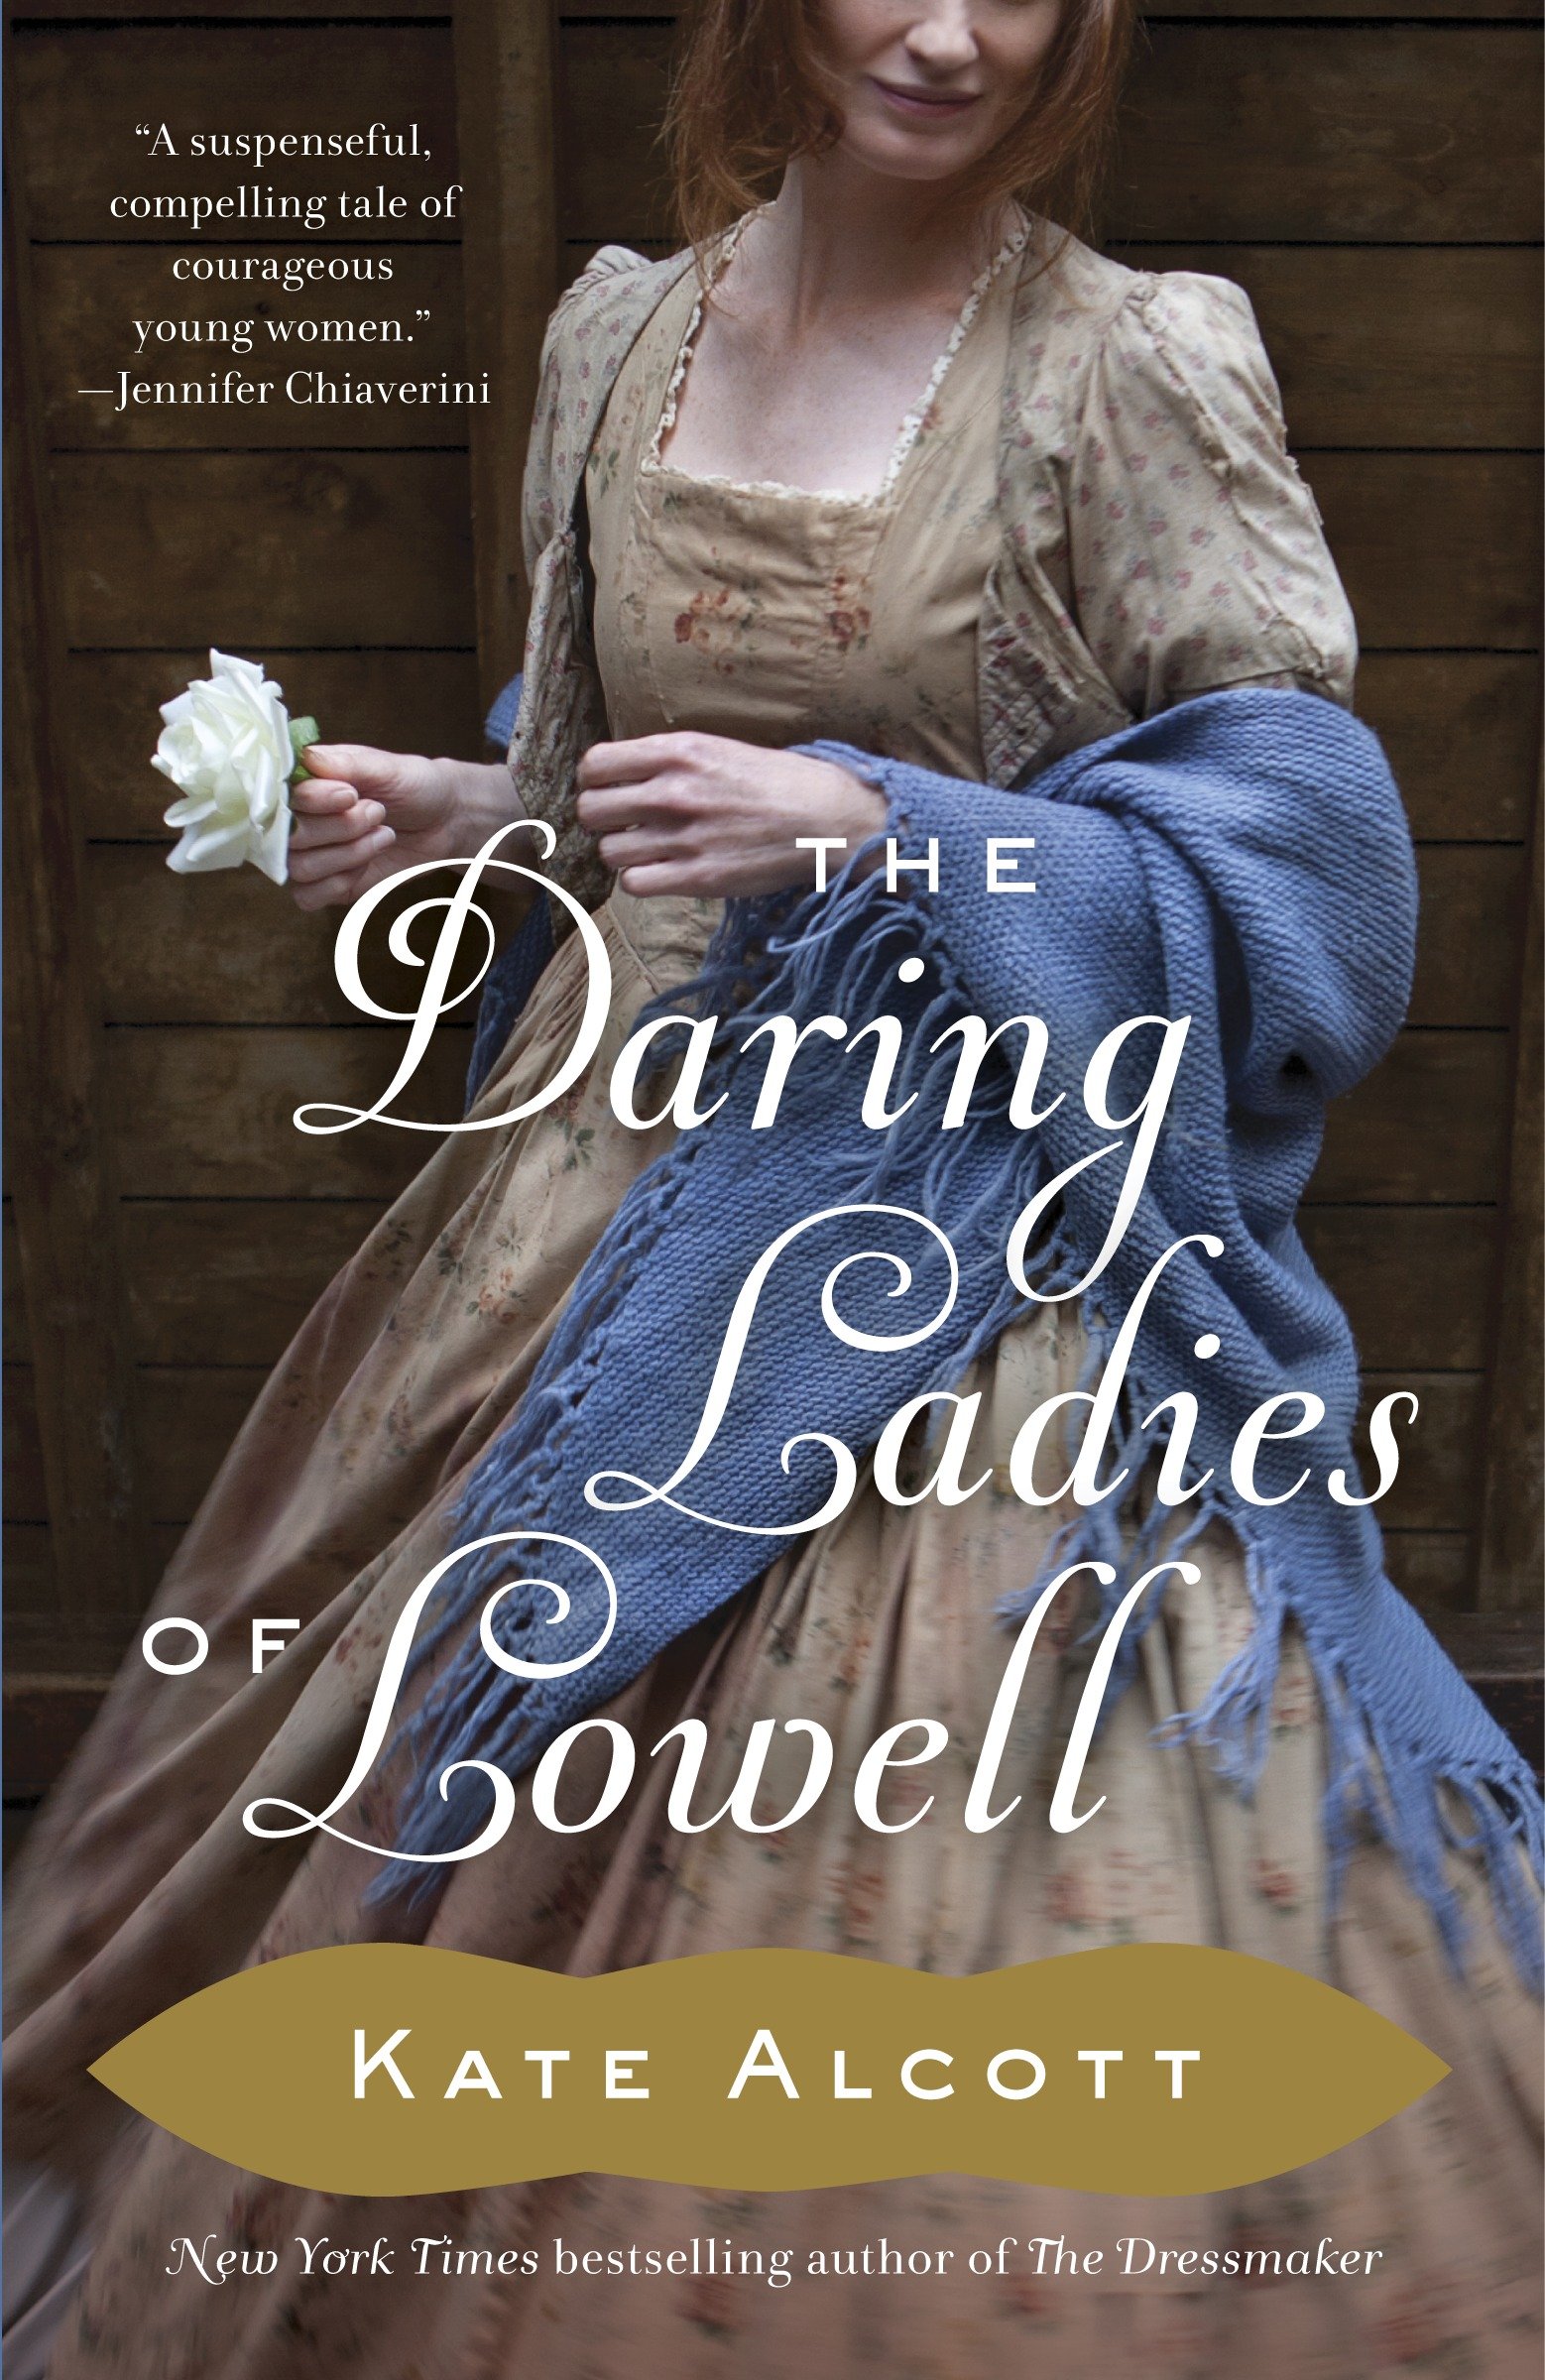 The daring ladies of Lowell cover image